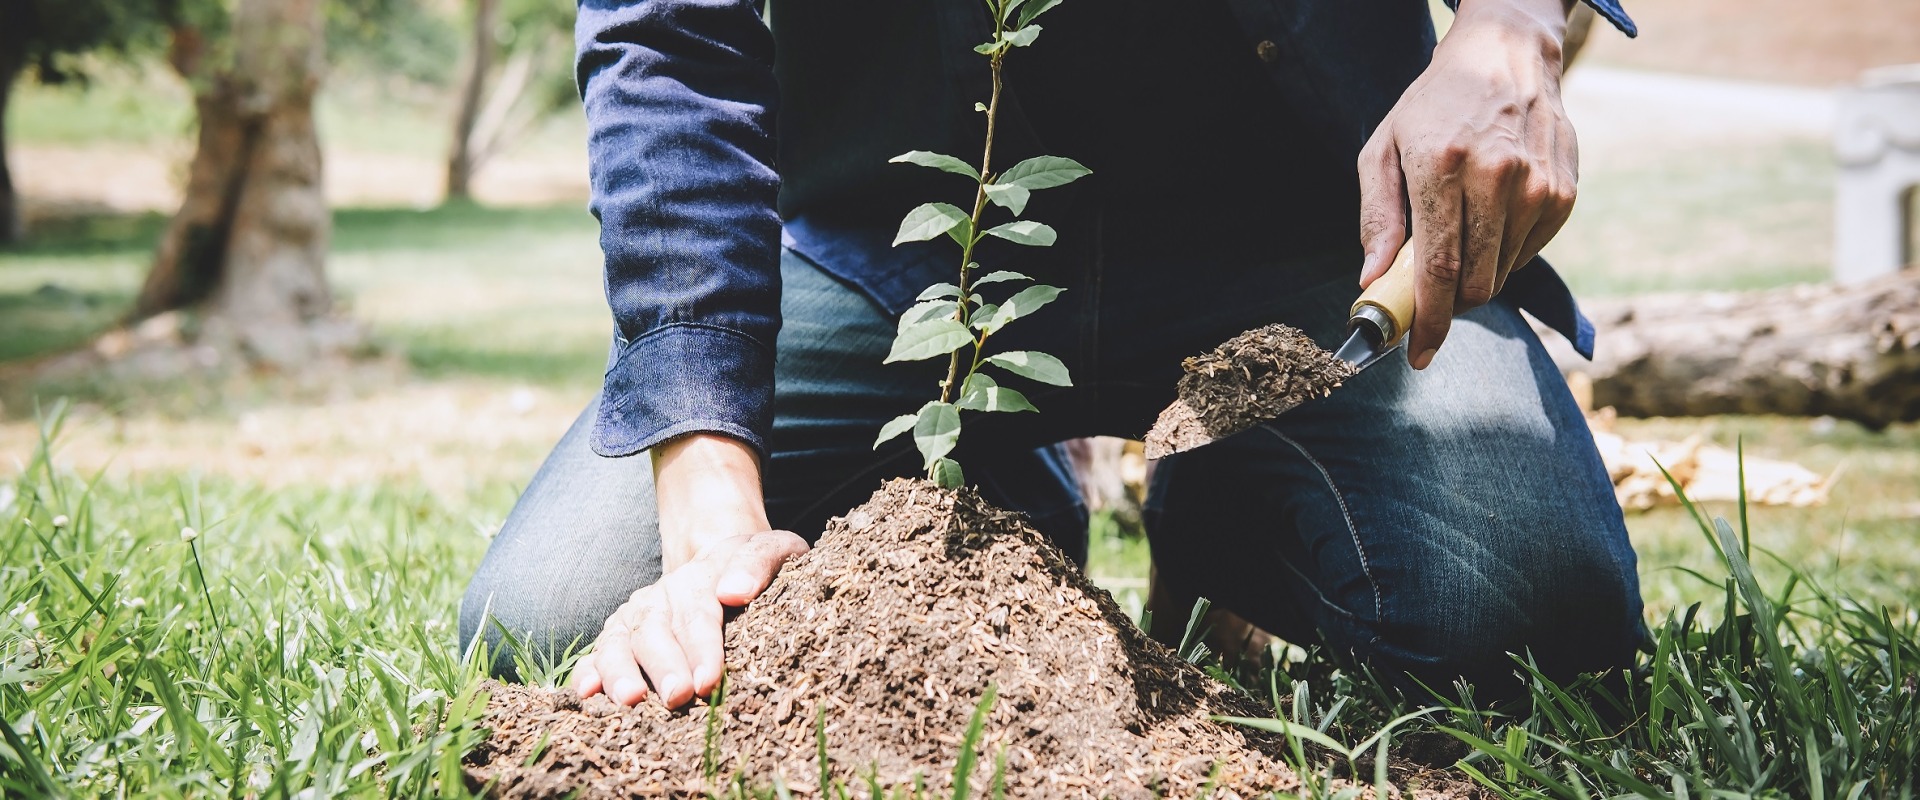 Tree Planting Safety Tips